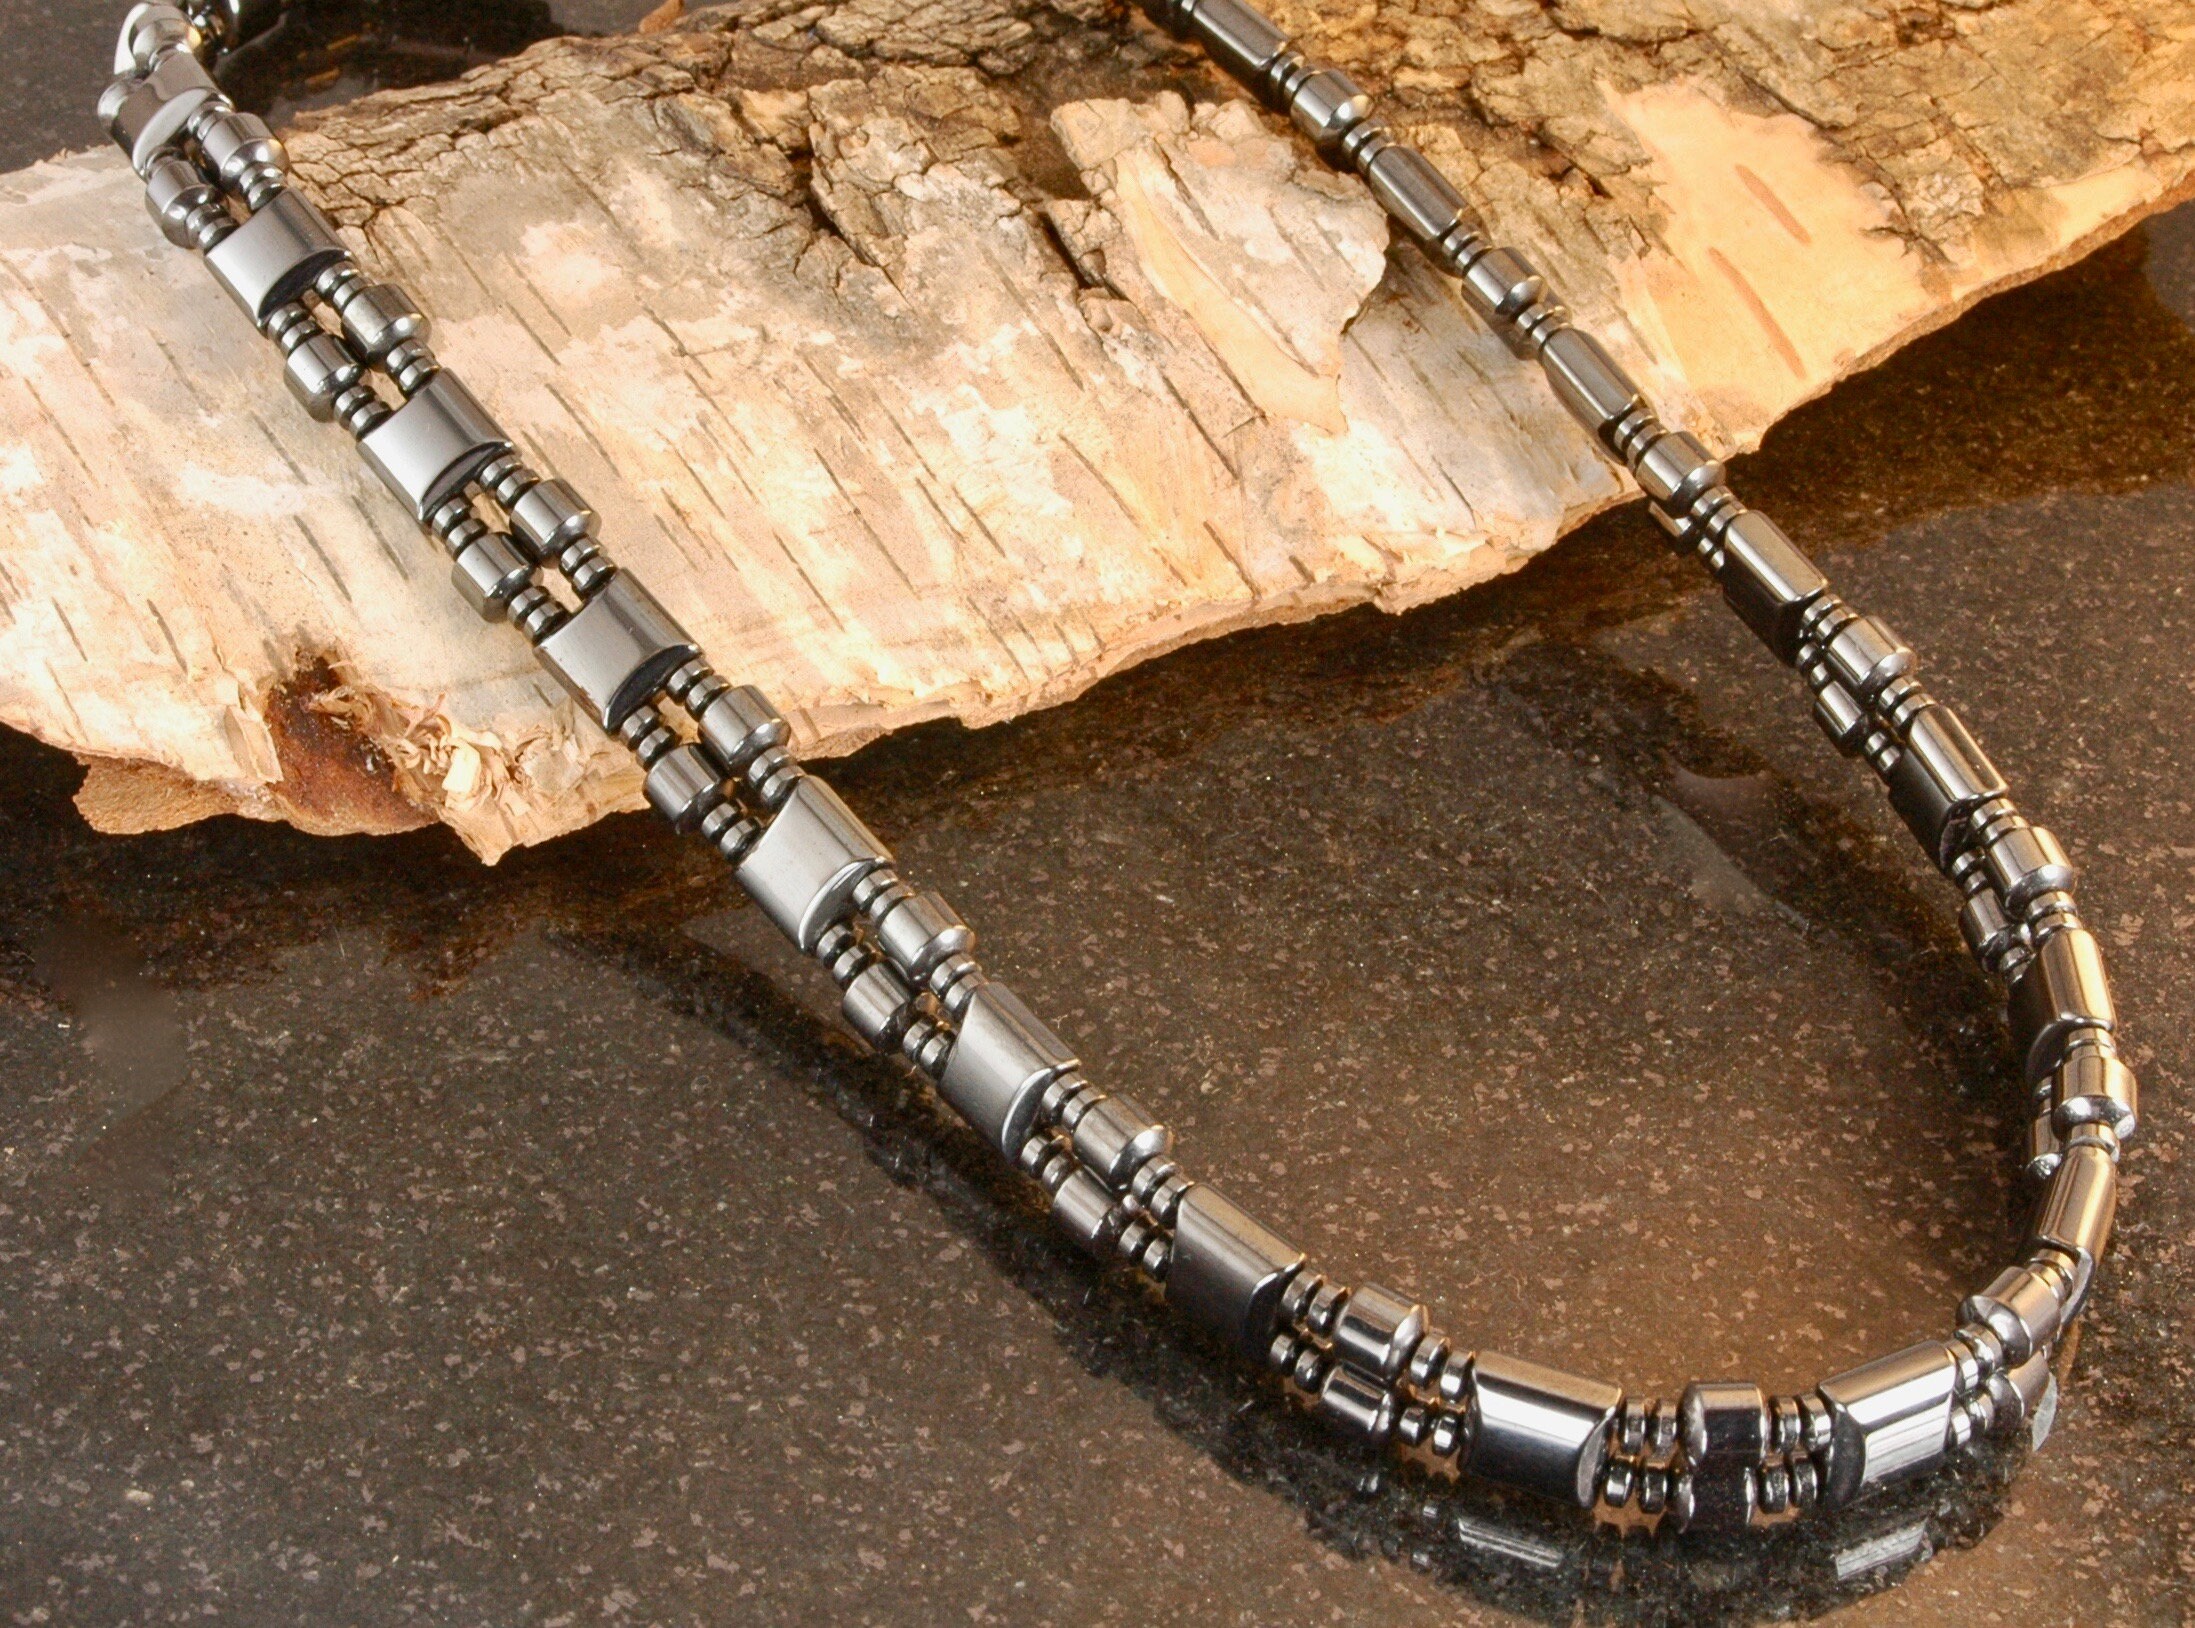 Black Magnetic Hematite Therapy Necklace 20.0